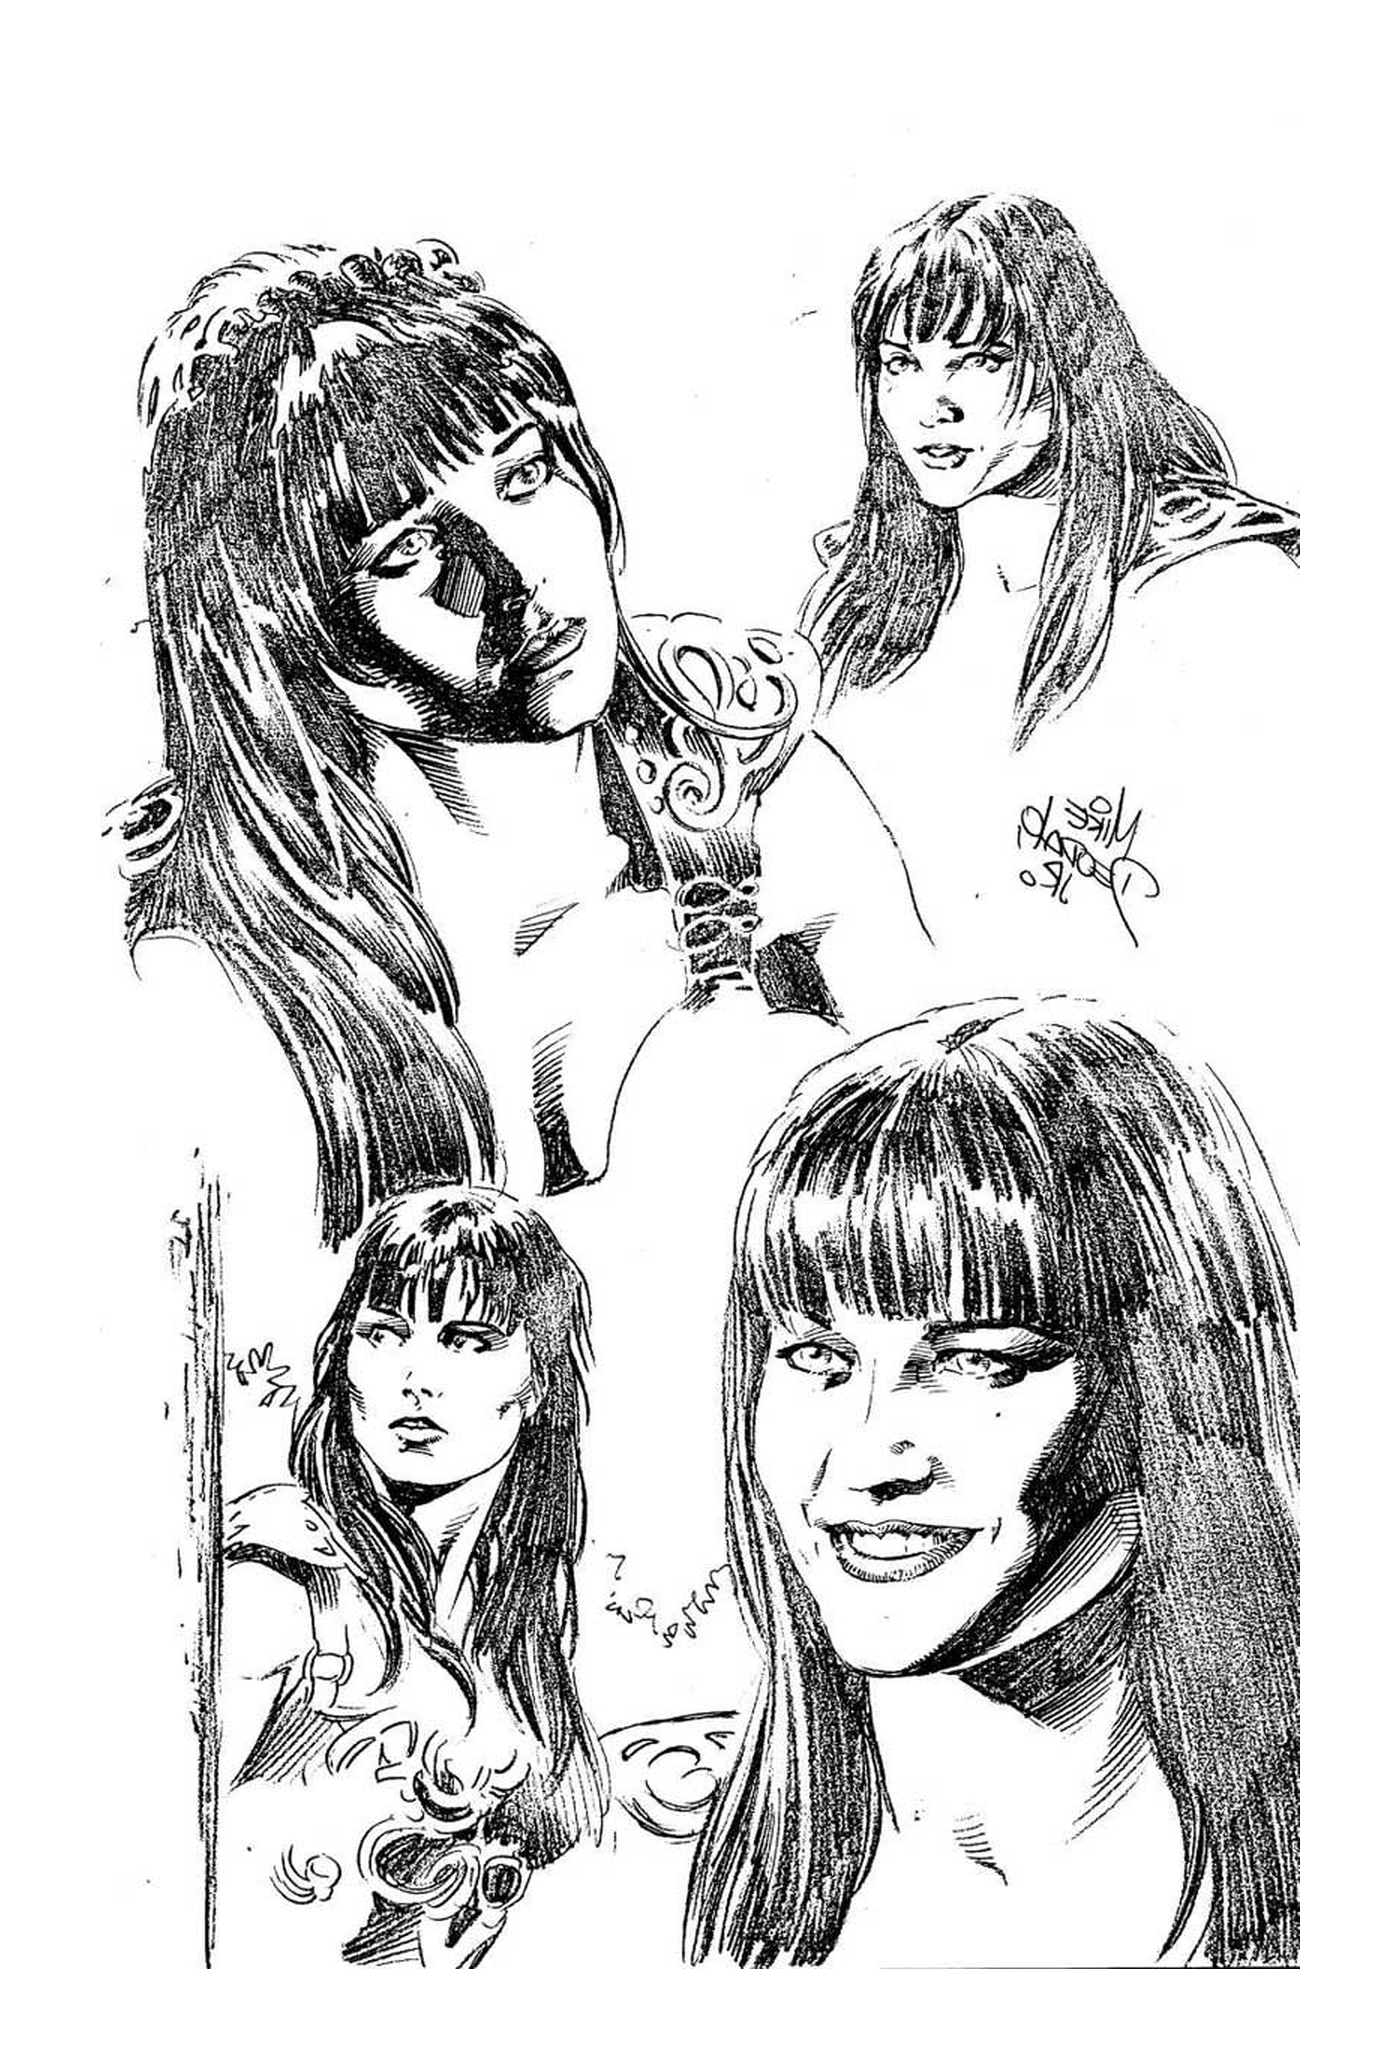  Xena in different facets 